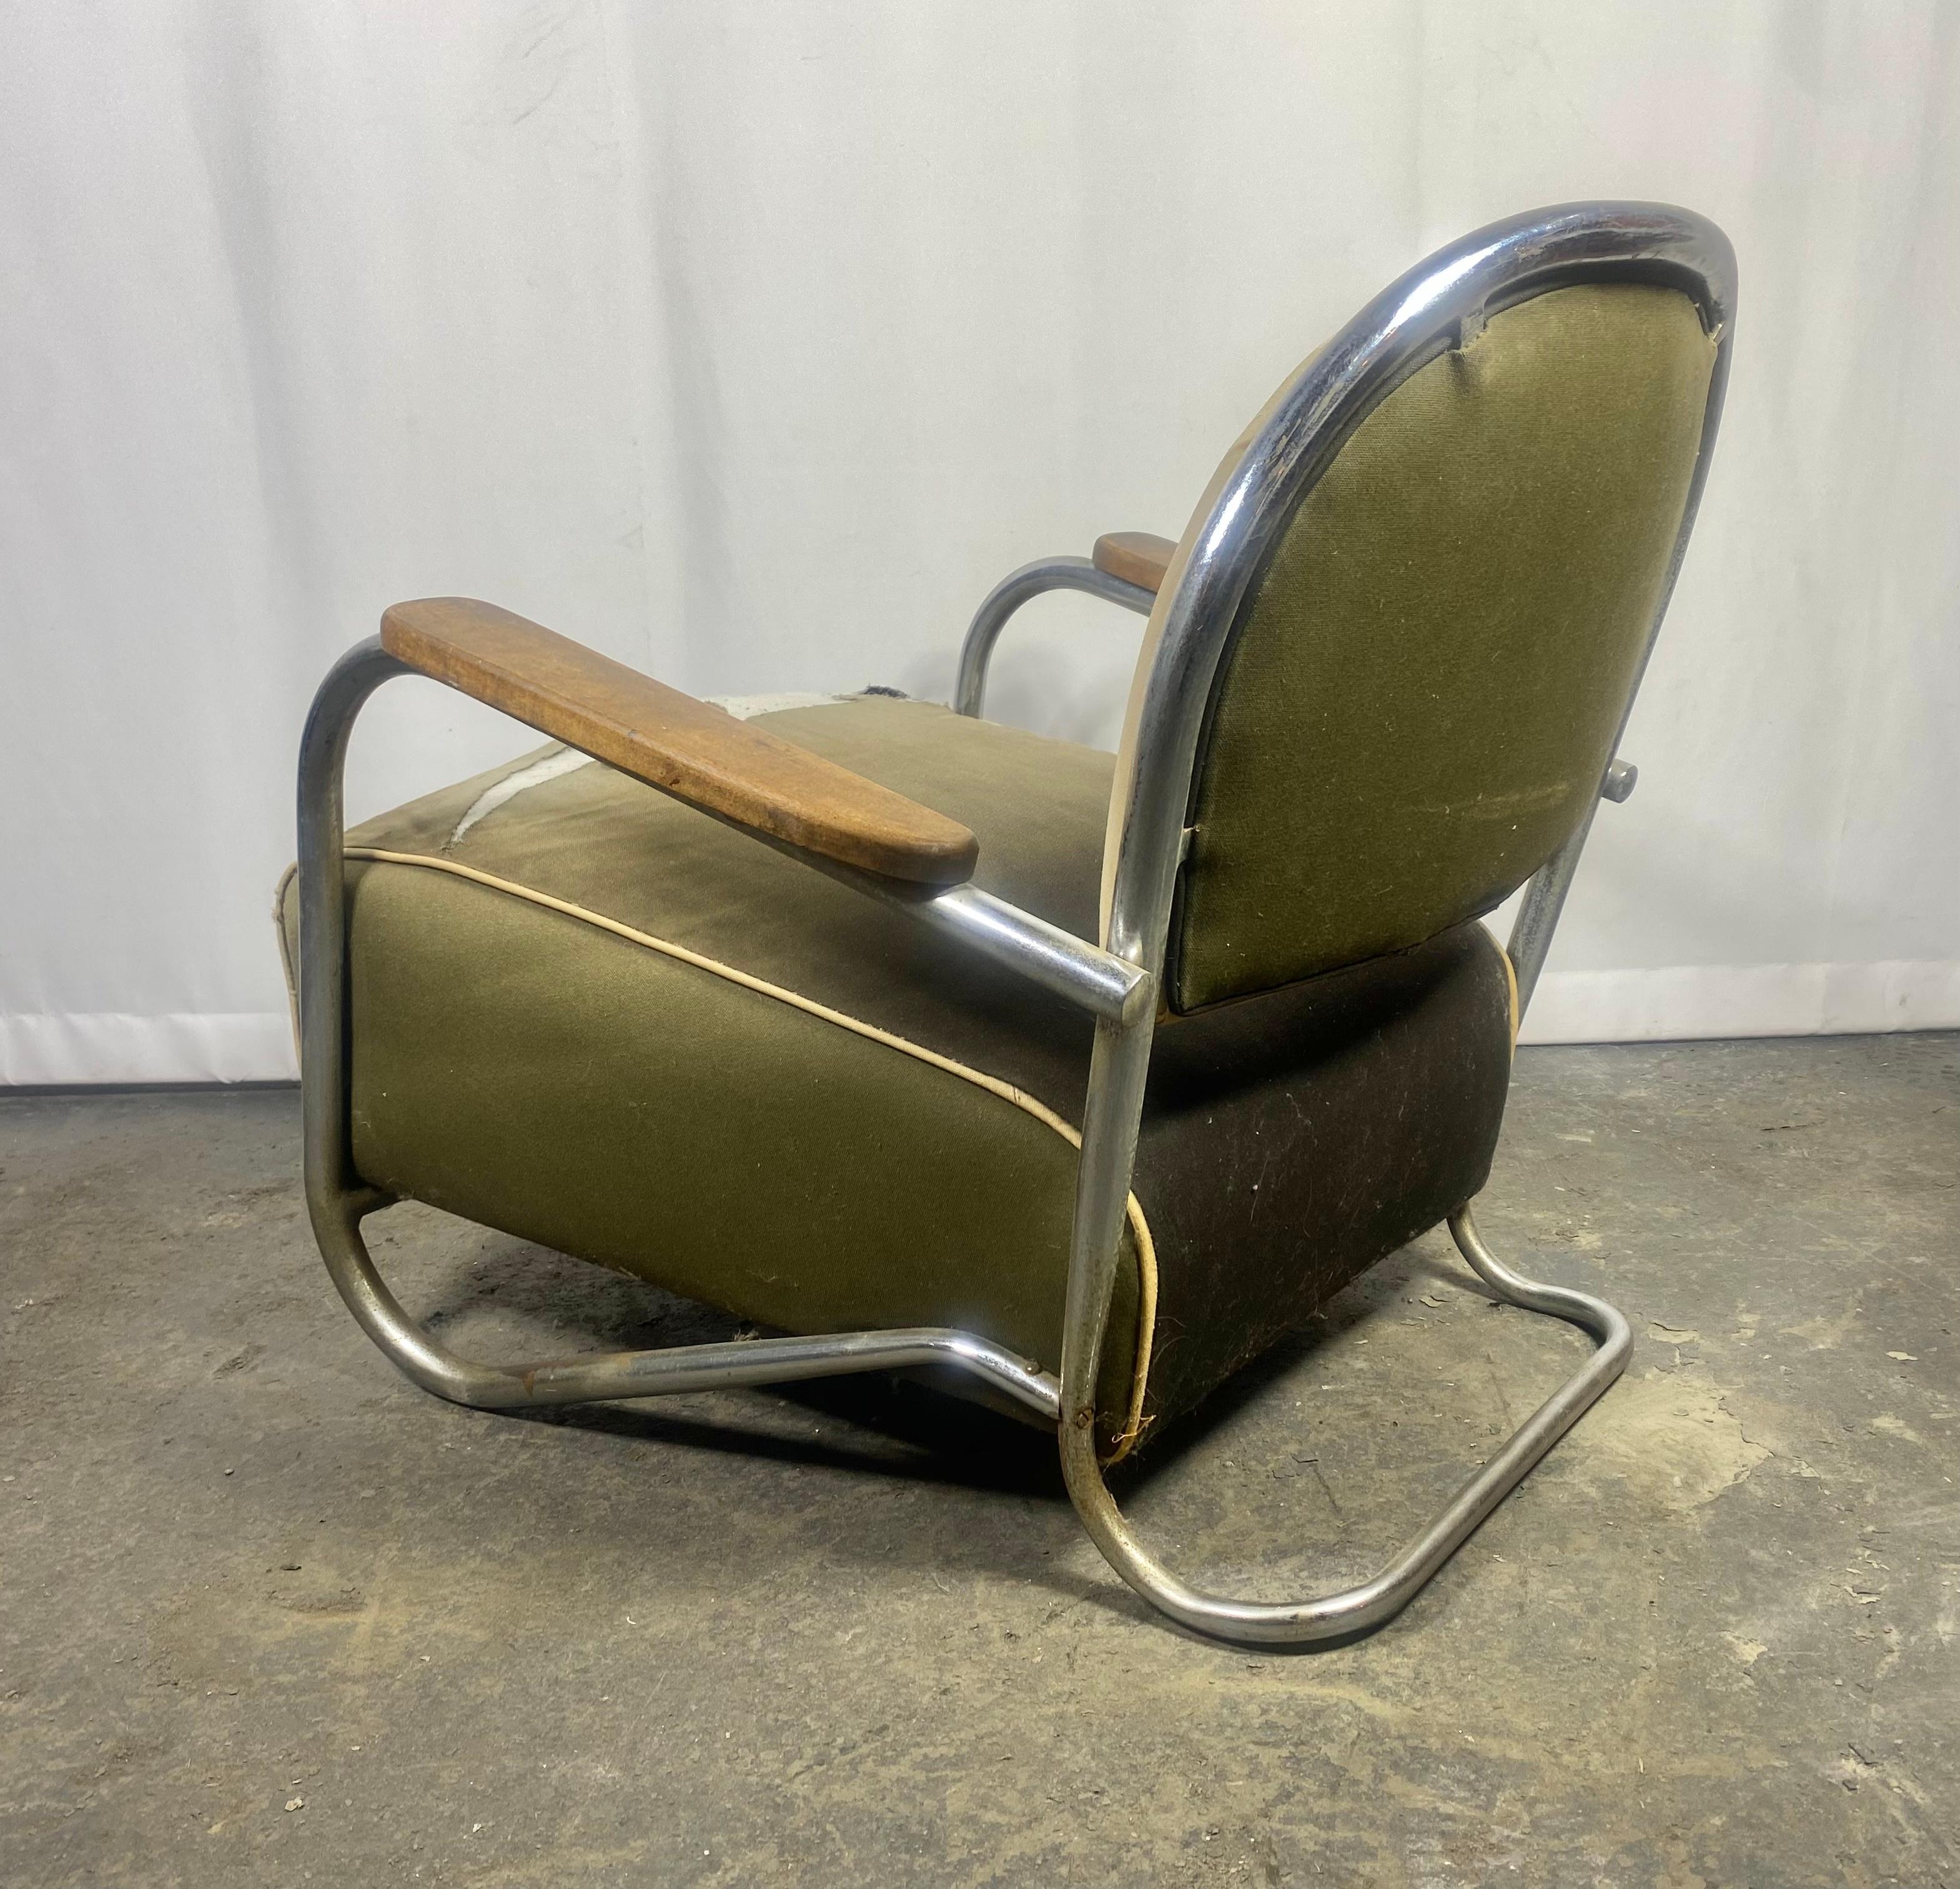 Seldom seen Kem Weber / Lloyds,  Chromed Steel Art Deco Lounge Chair c 1934  In Distressed Condition For Sale In Buffalo, NY